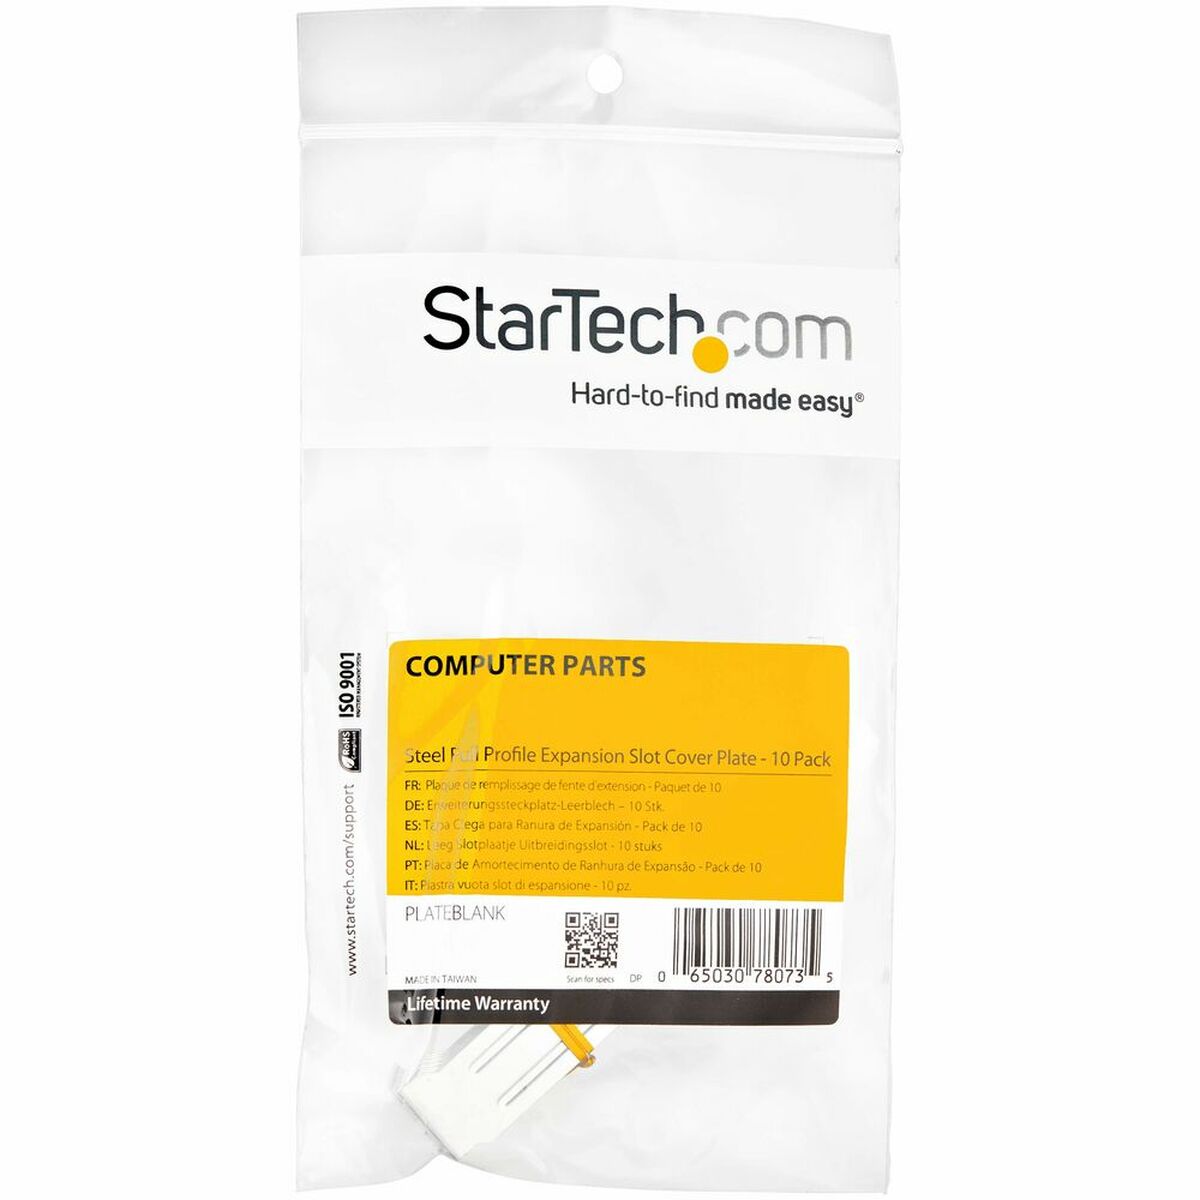 Cover Startech PLATEBLANK, Startech, Computing, Components, cover-startech-plateblank, Brand_Startech, category-reference-2609, category-reference-2803, category-reference-2811, category-reference-t-19685, category-reference-t-19912, category-reference-t-21360, category-reference-t-25662, computers / components, Condition_NEW, Price_20 - 50, RiotNook